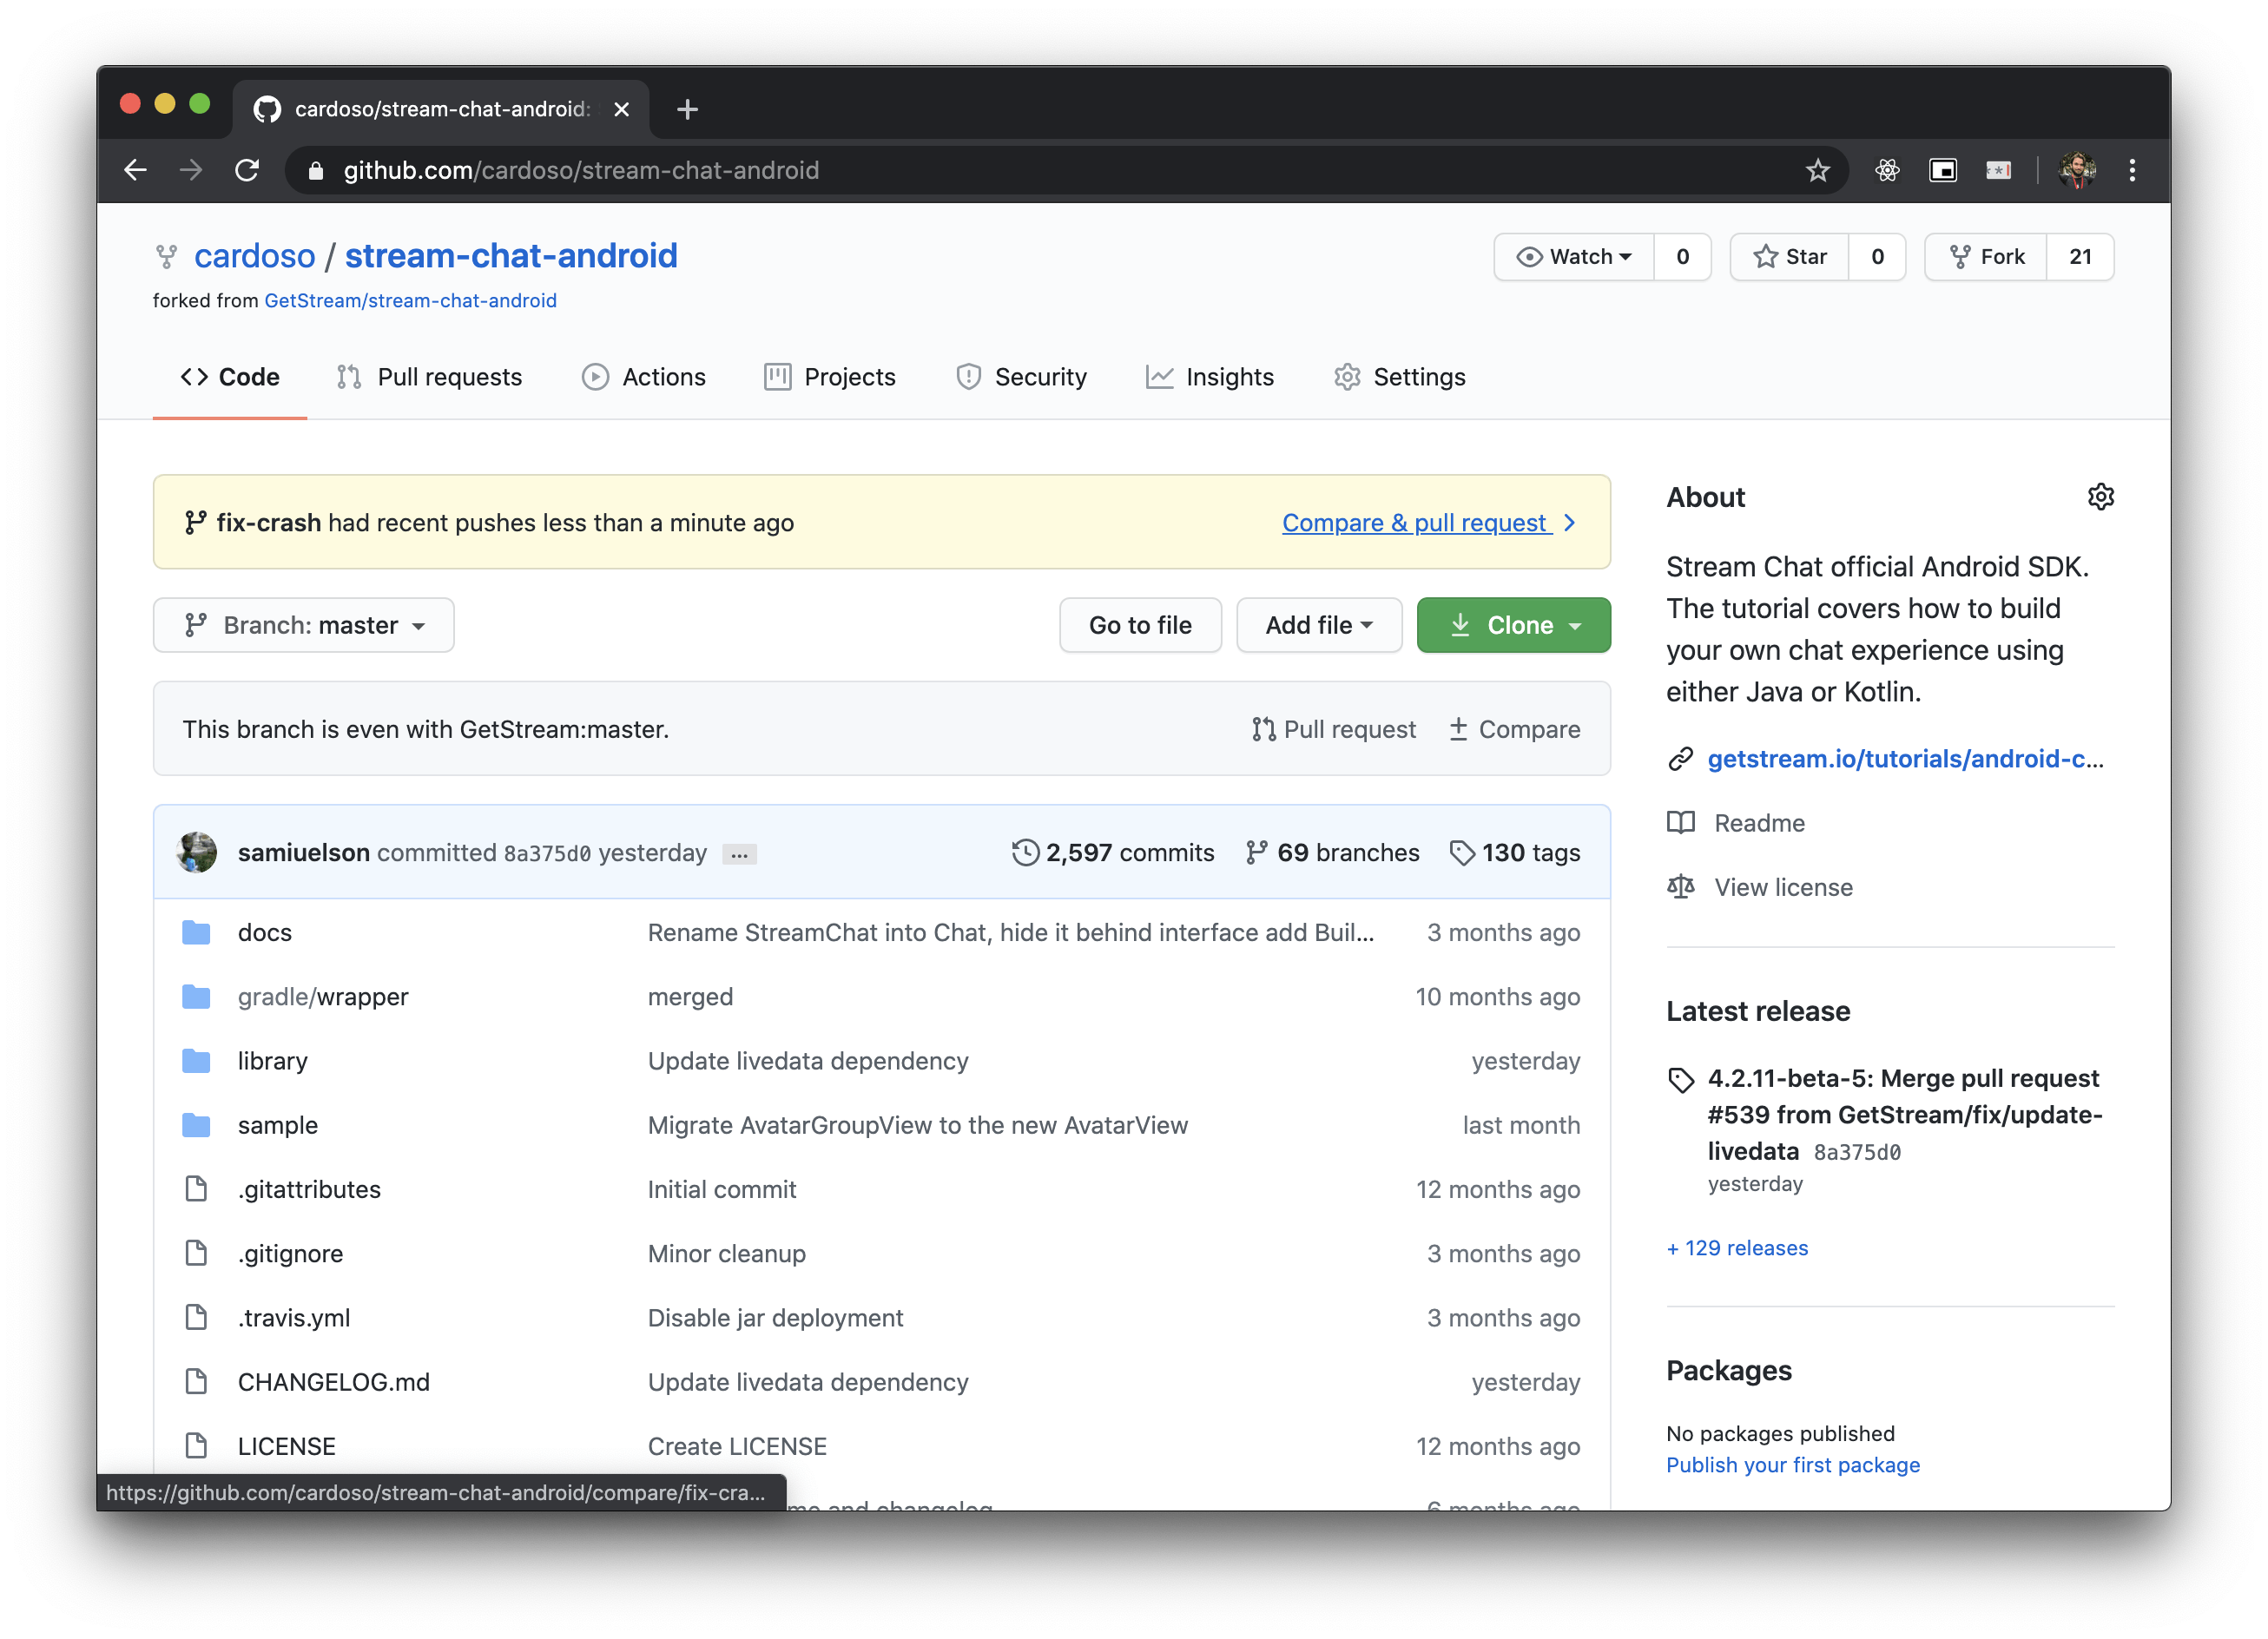 Image shows GitHub repo page with a prompt to open a Pull Request with newly pushed branch